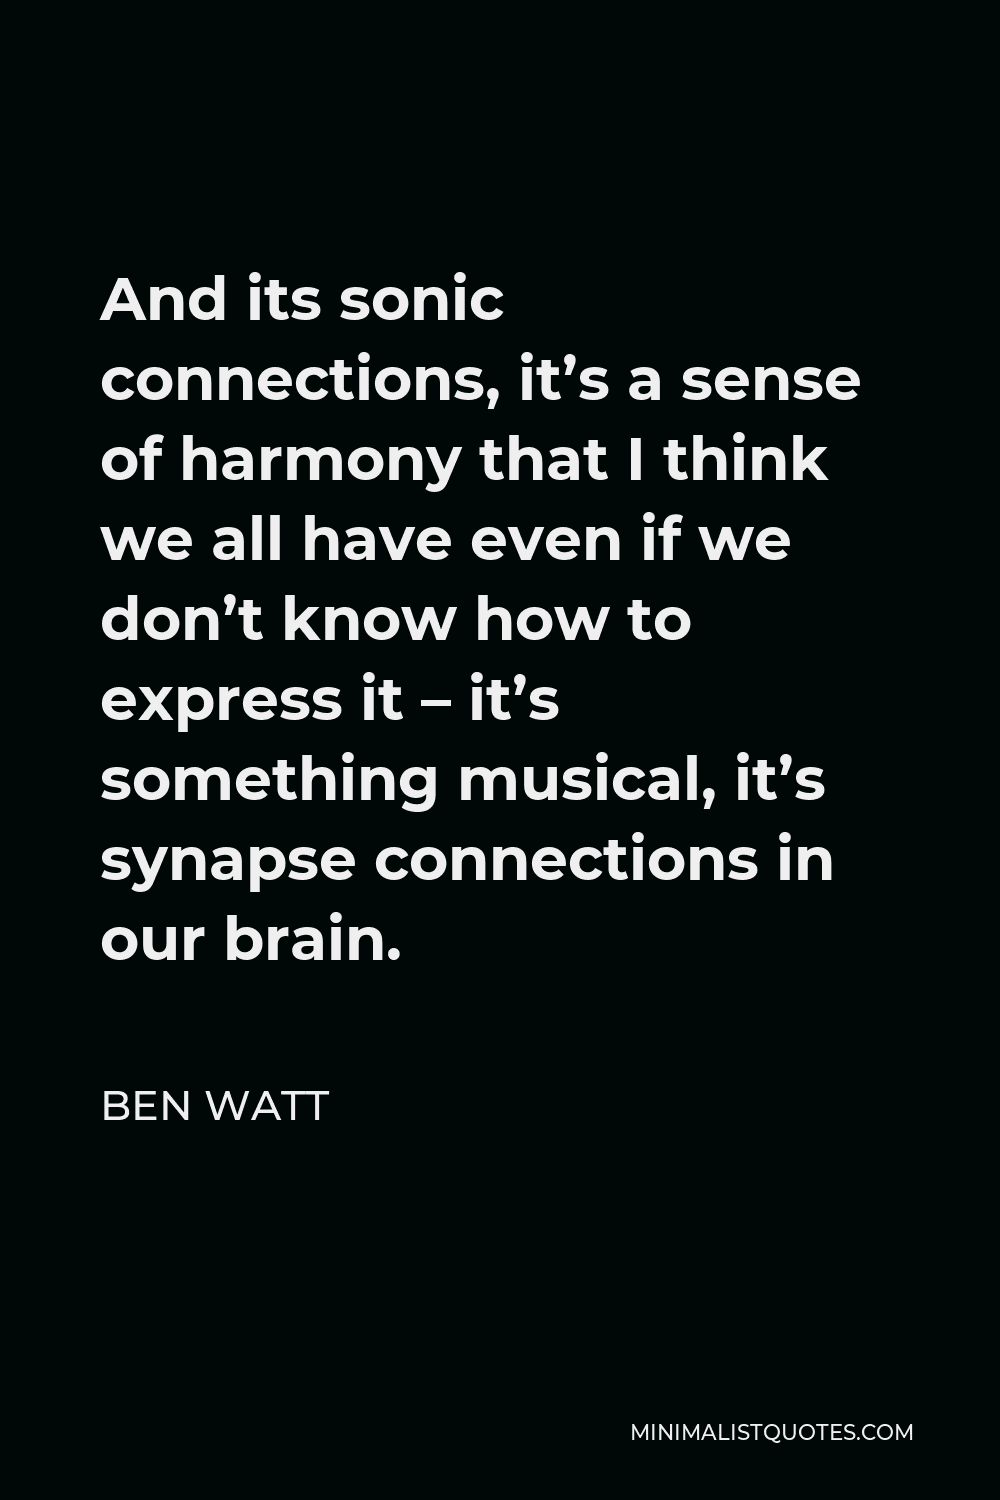 Ben Watt Quote - And its sonic connections, it’s a sense of harmony that I think we all have even if we don’t know how to express it – it’s something musical, it’s synapse connections in our brain.